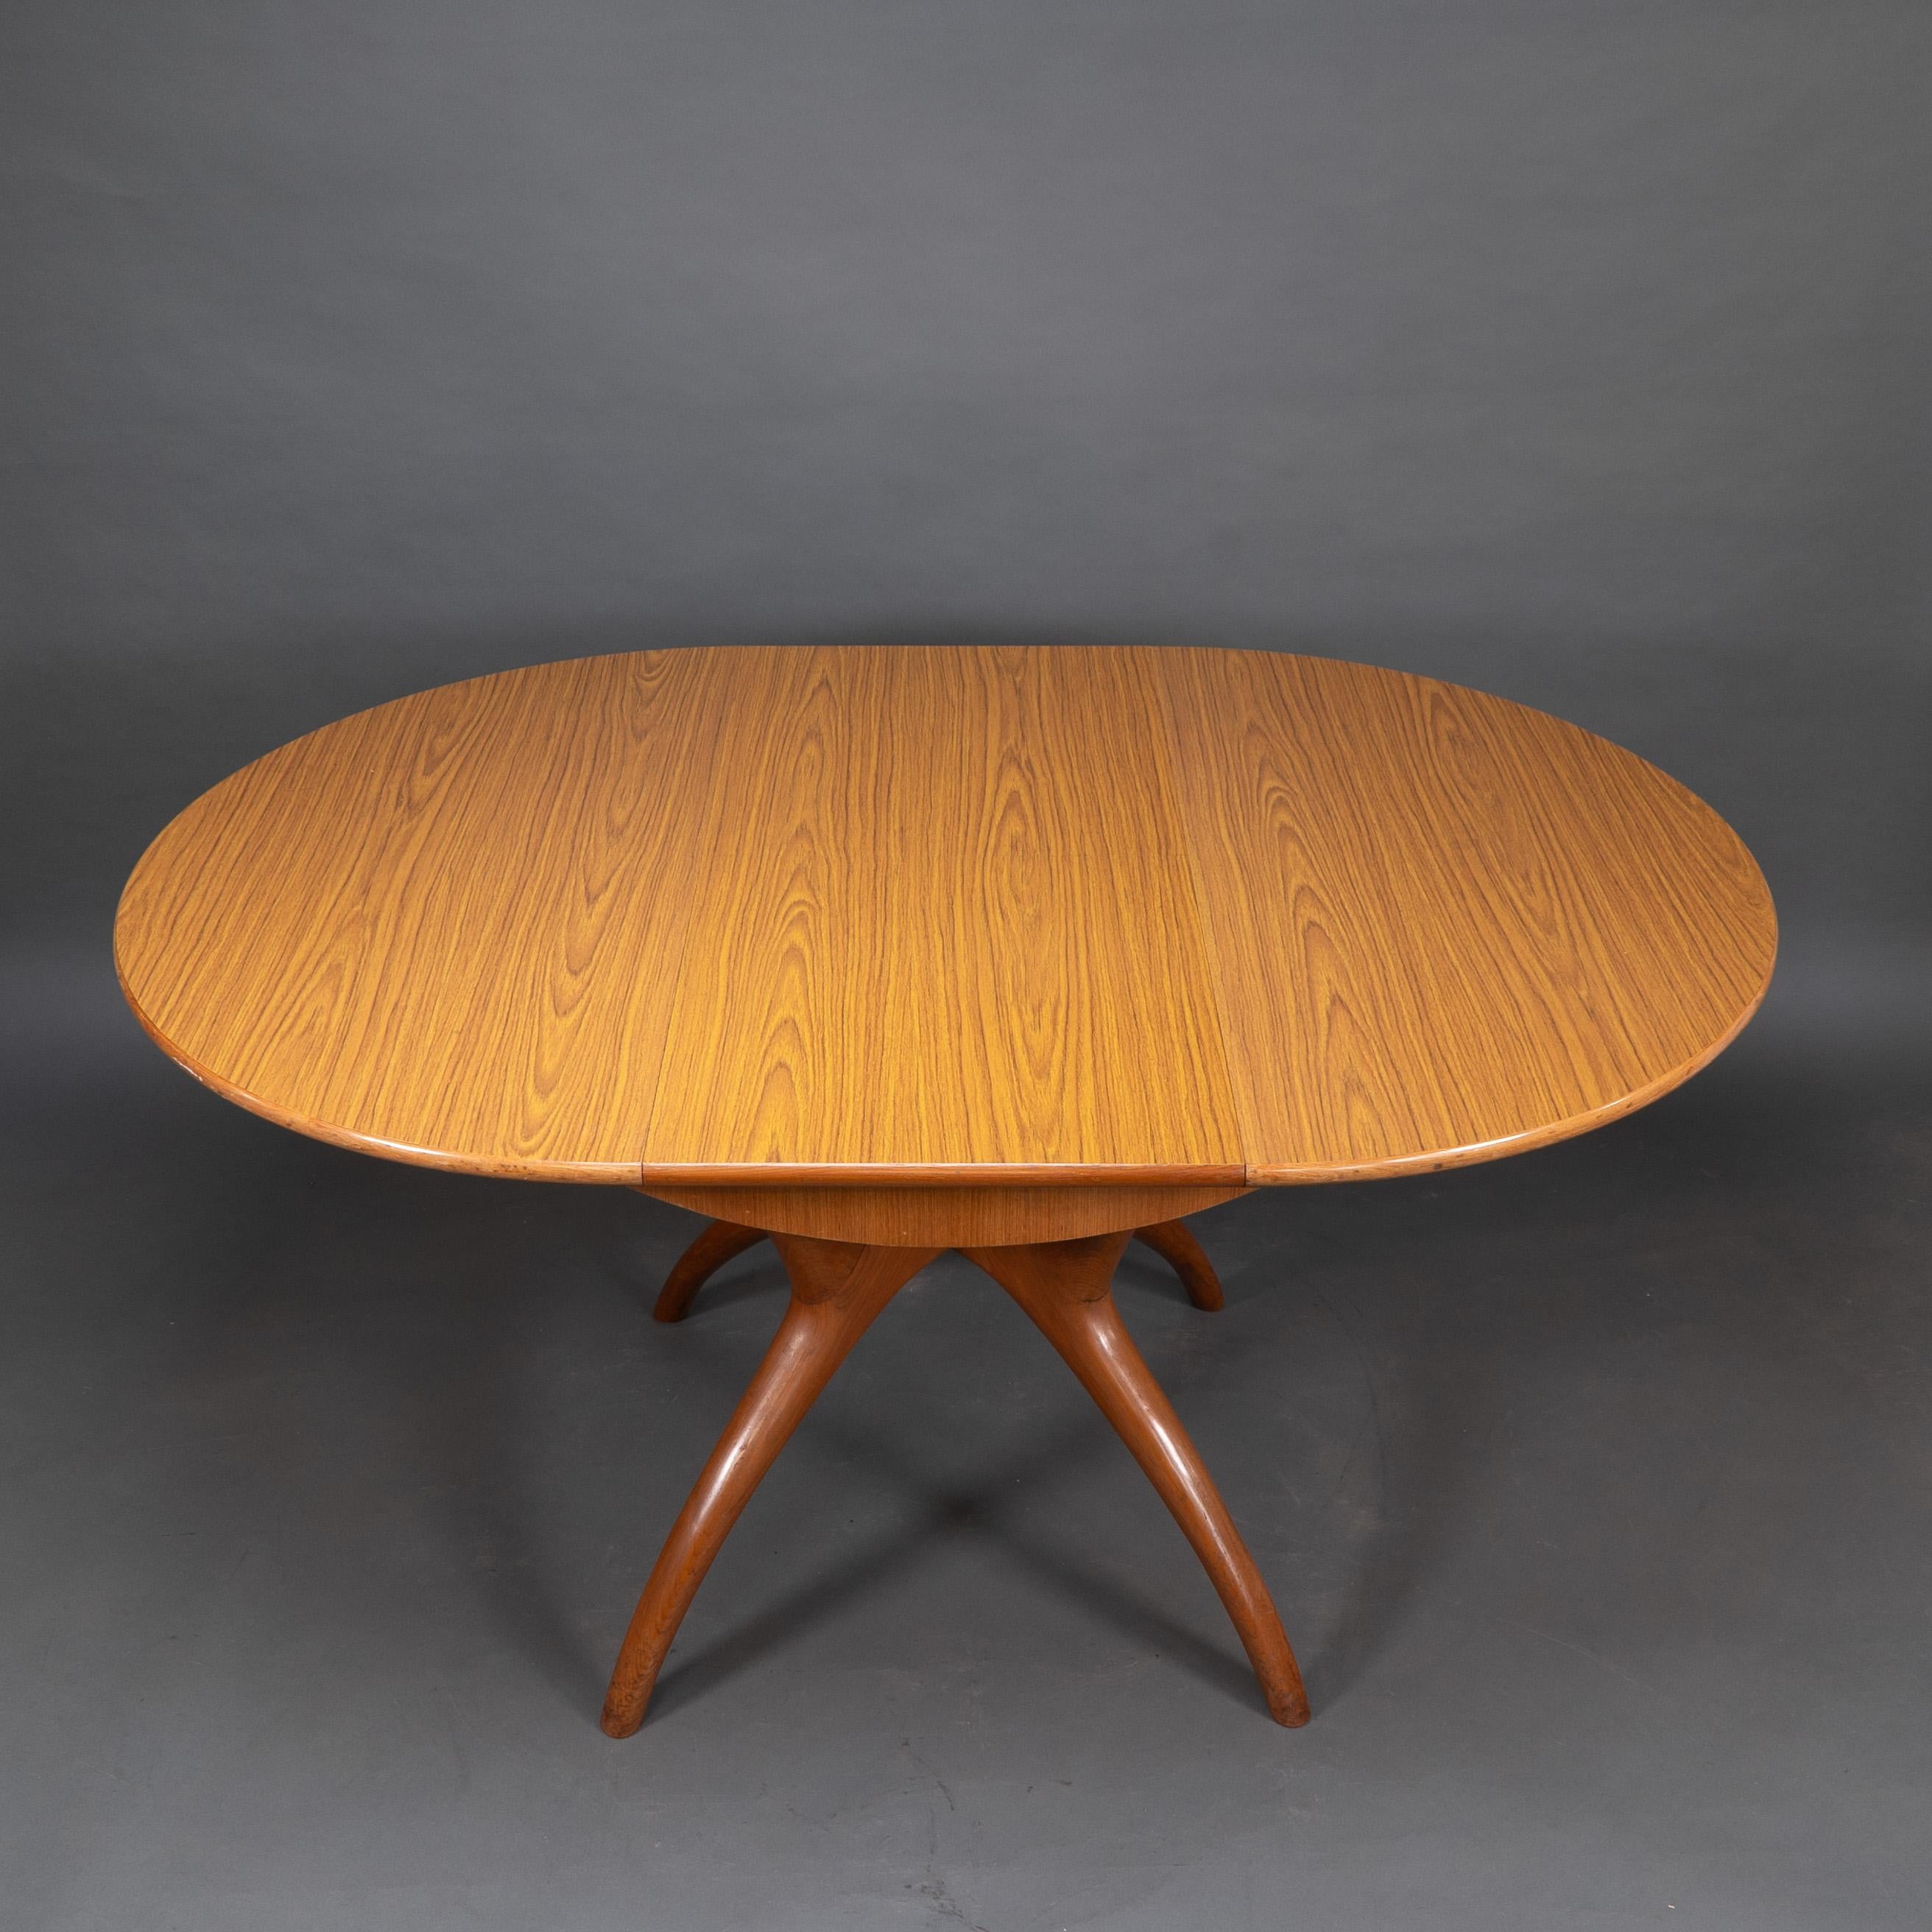 Midcentury Teak Extending Dining Table with Organic Style Cross Frame Legs For Sale 4